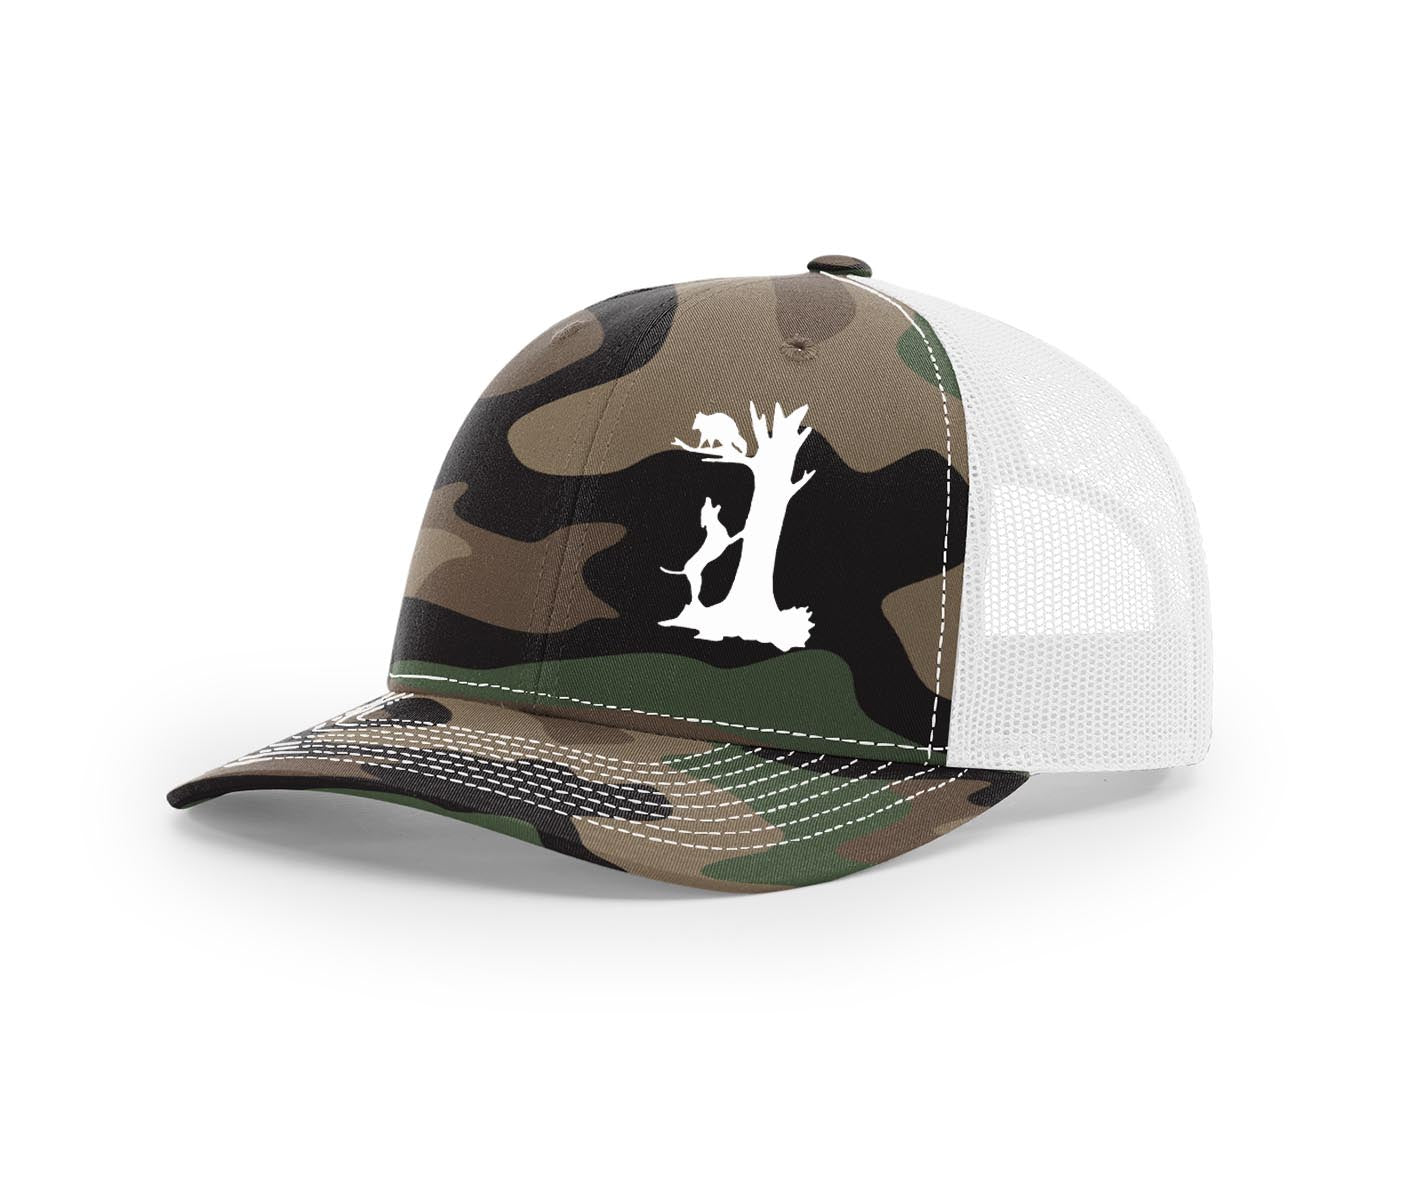 Treed Coon Southern Houndsman Snapback Hat, Camo/White